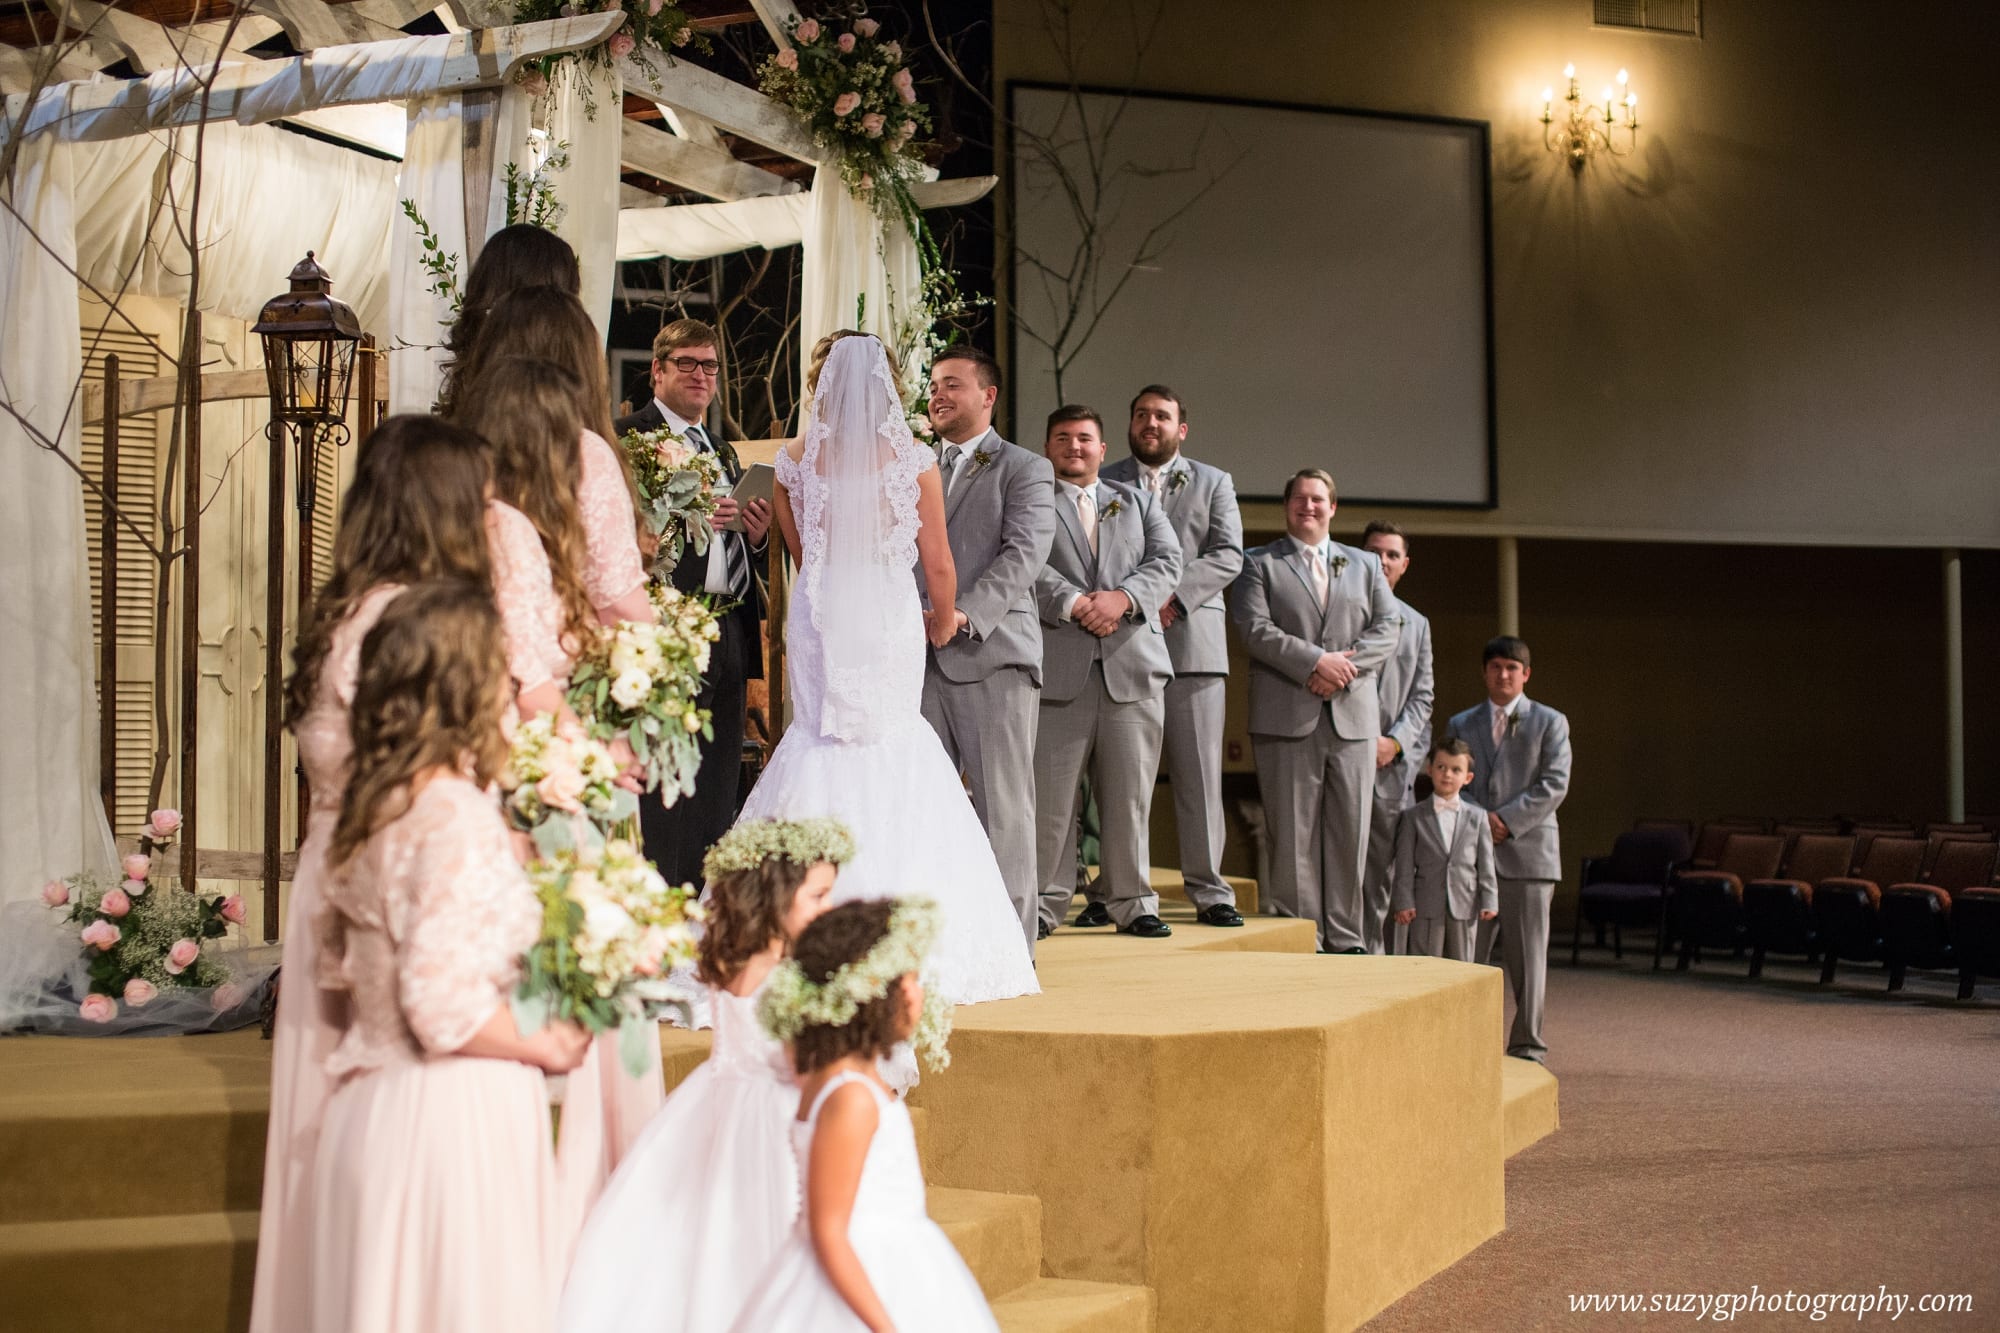 vows by victoria-lake charles-wedding-photography-suzy g-photography-suzygphotography_0043